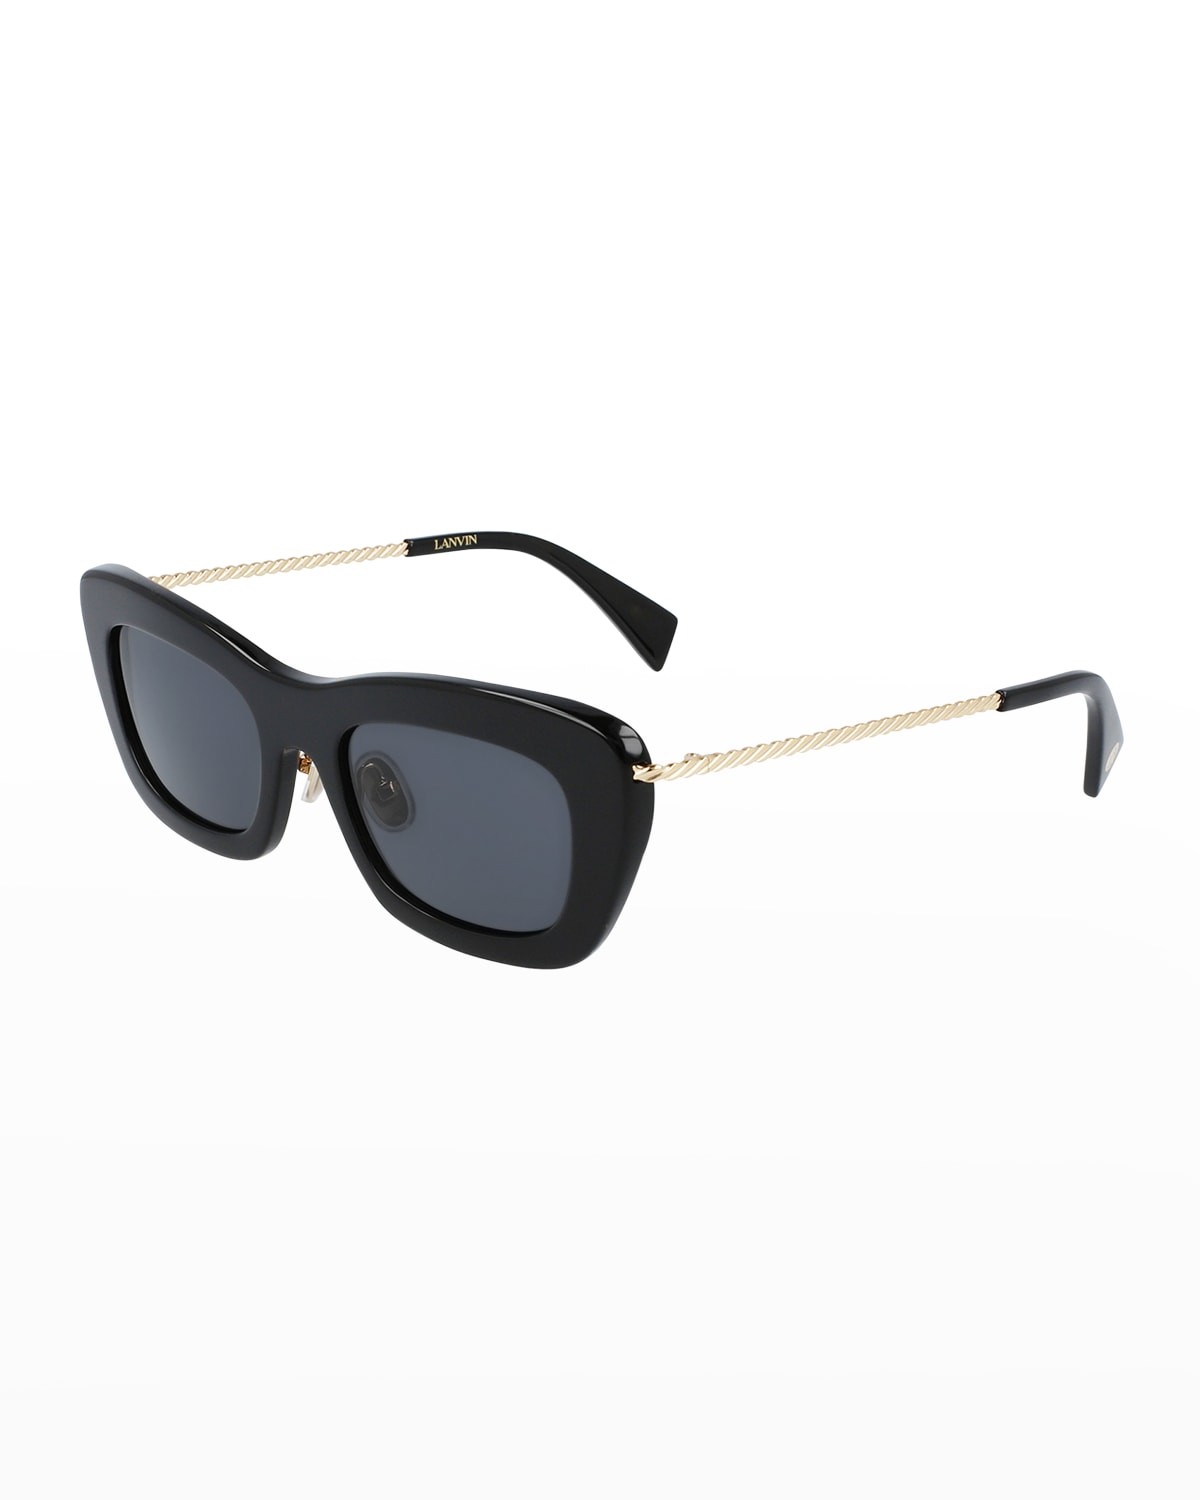 LANVIN BABE RECTANGLE TWISTED METAL/ACETATE SUNGLASSES